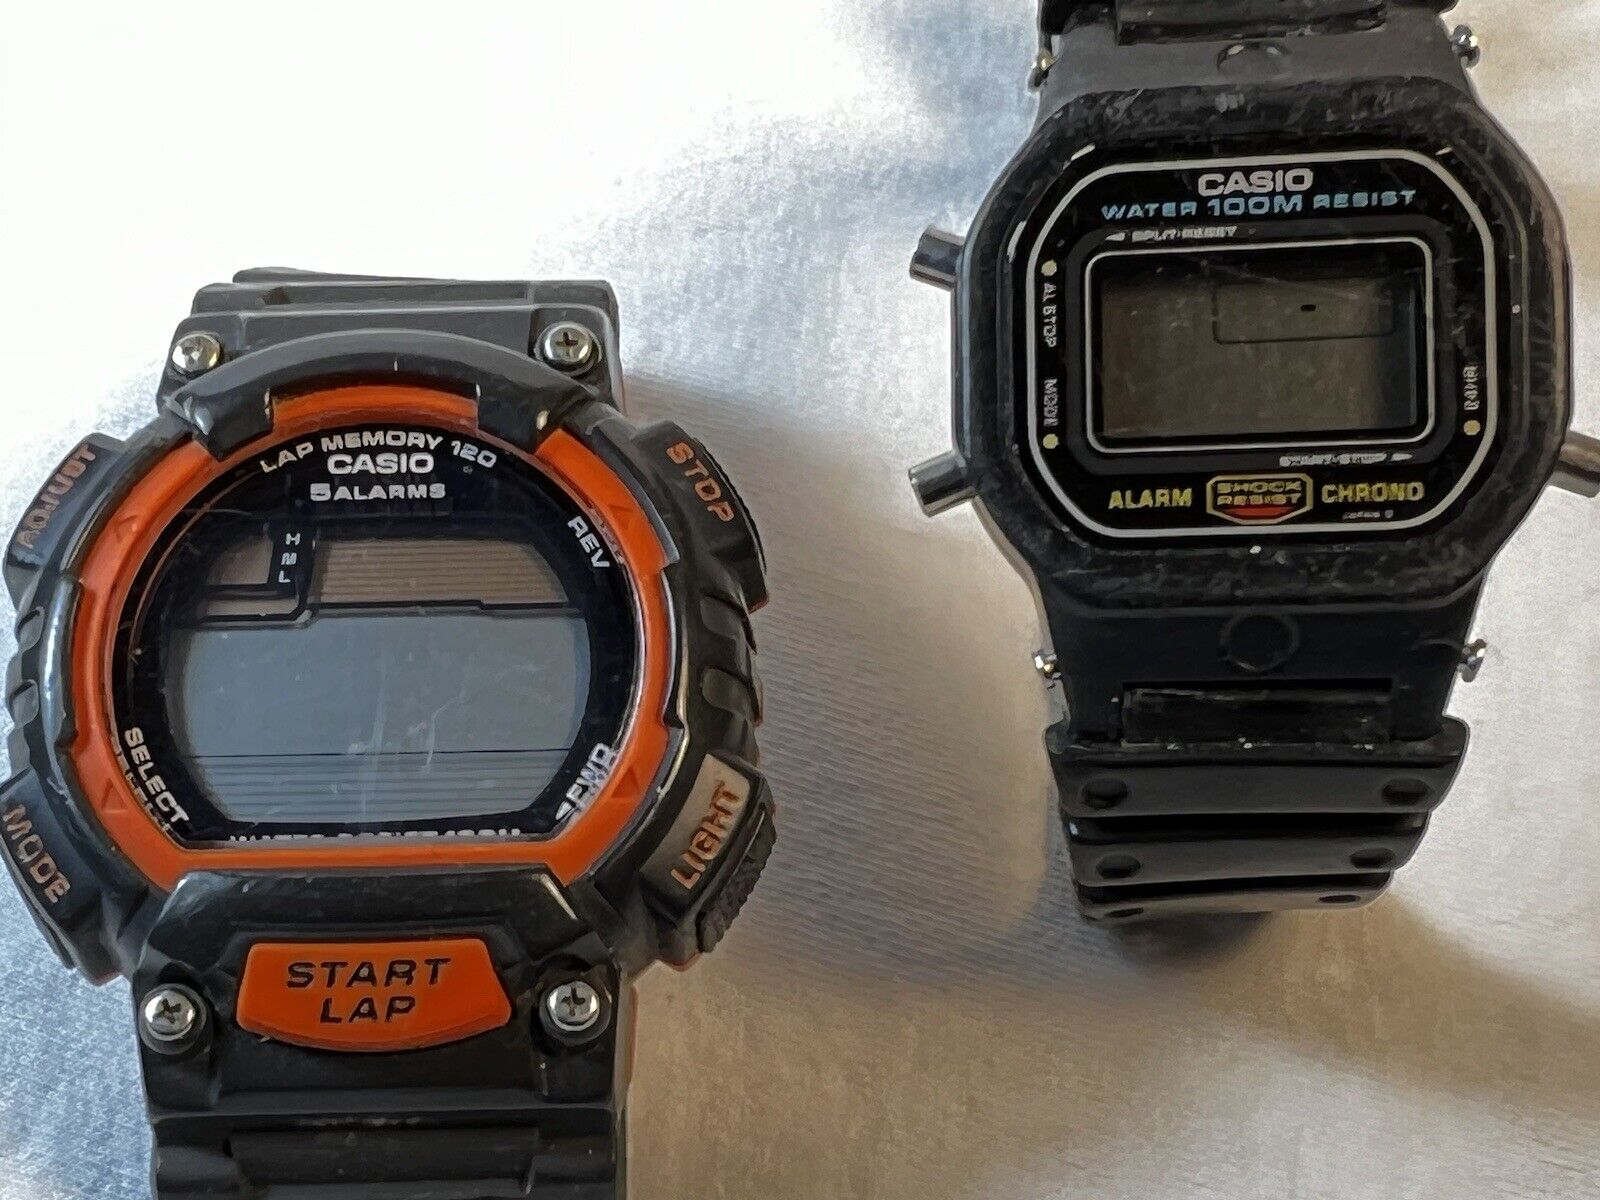 WATCHES OF 2 PARTS CASIO FOR REPAIR VTG OR DIGITAL LOT MEN'S - vintagewatches.pk